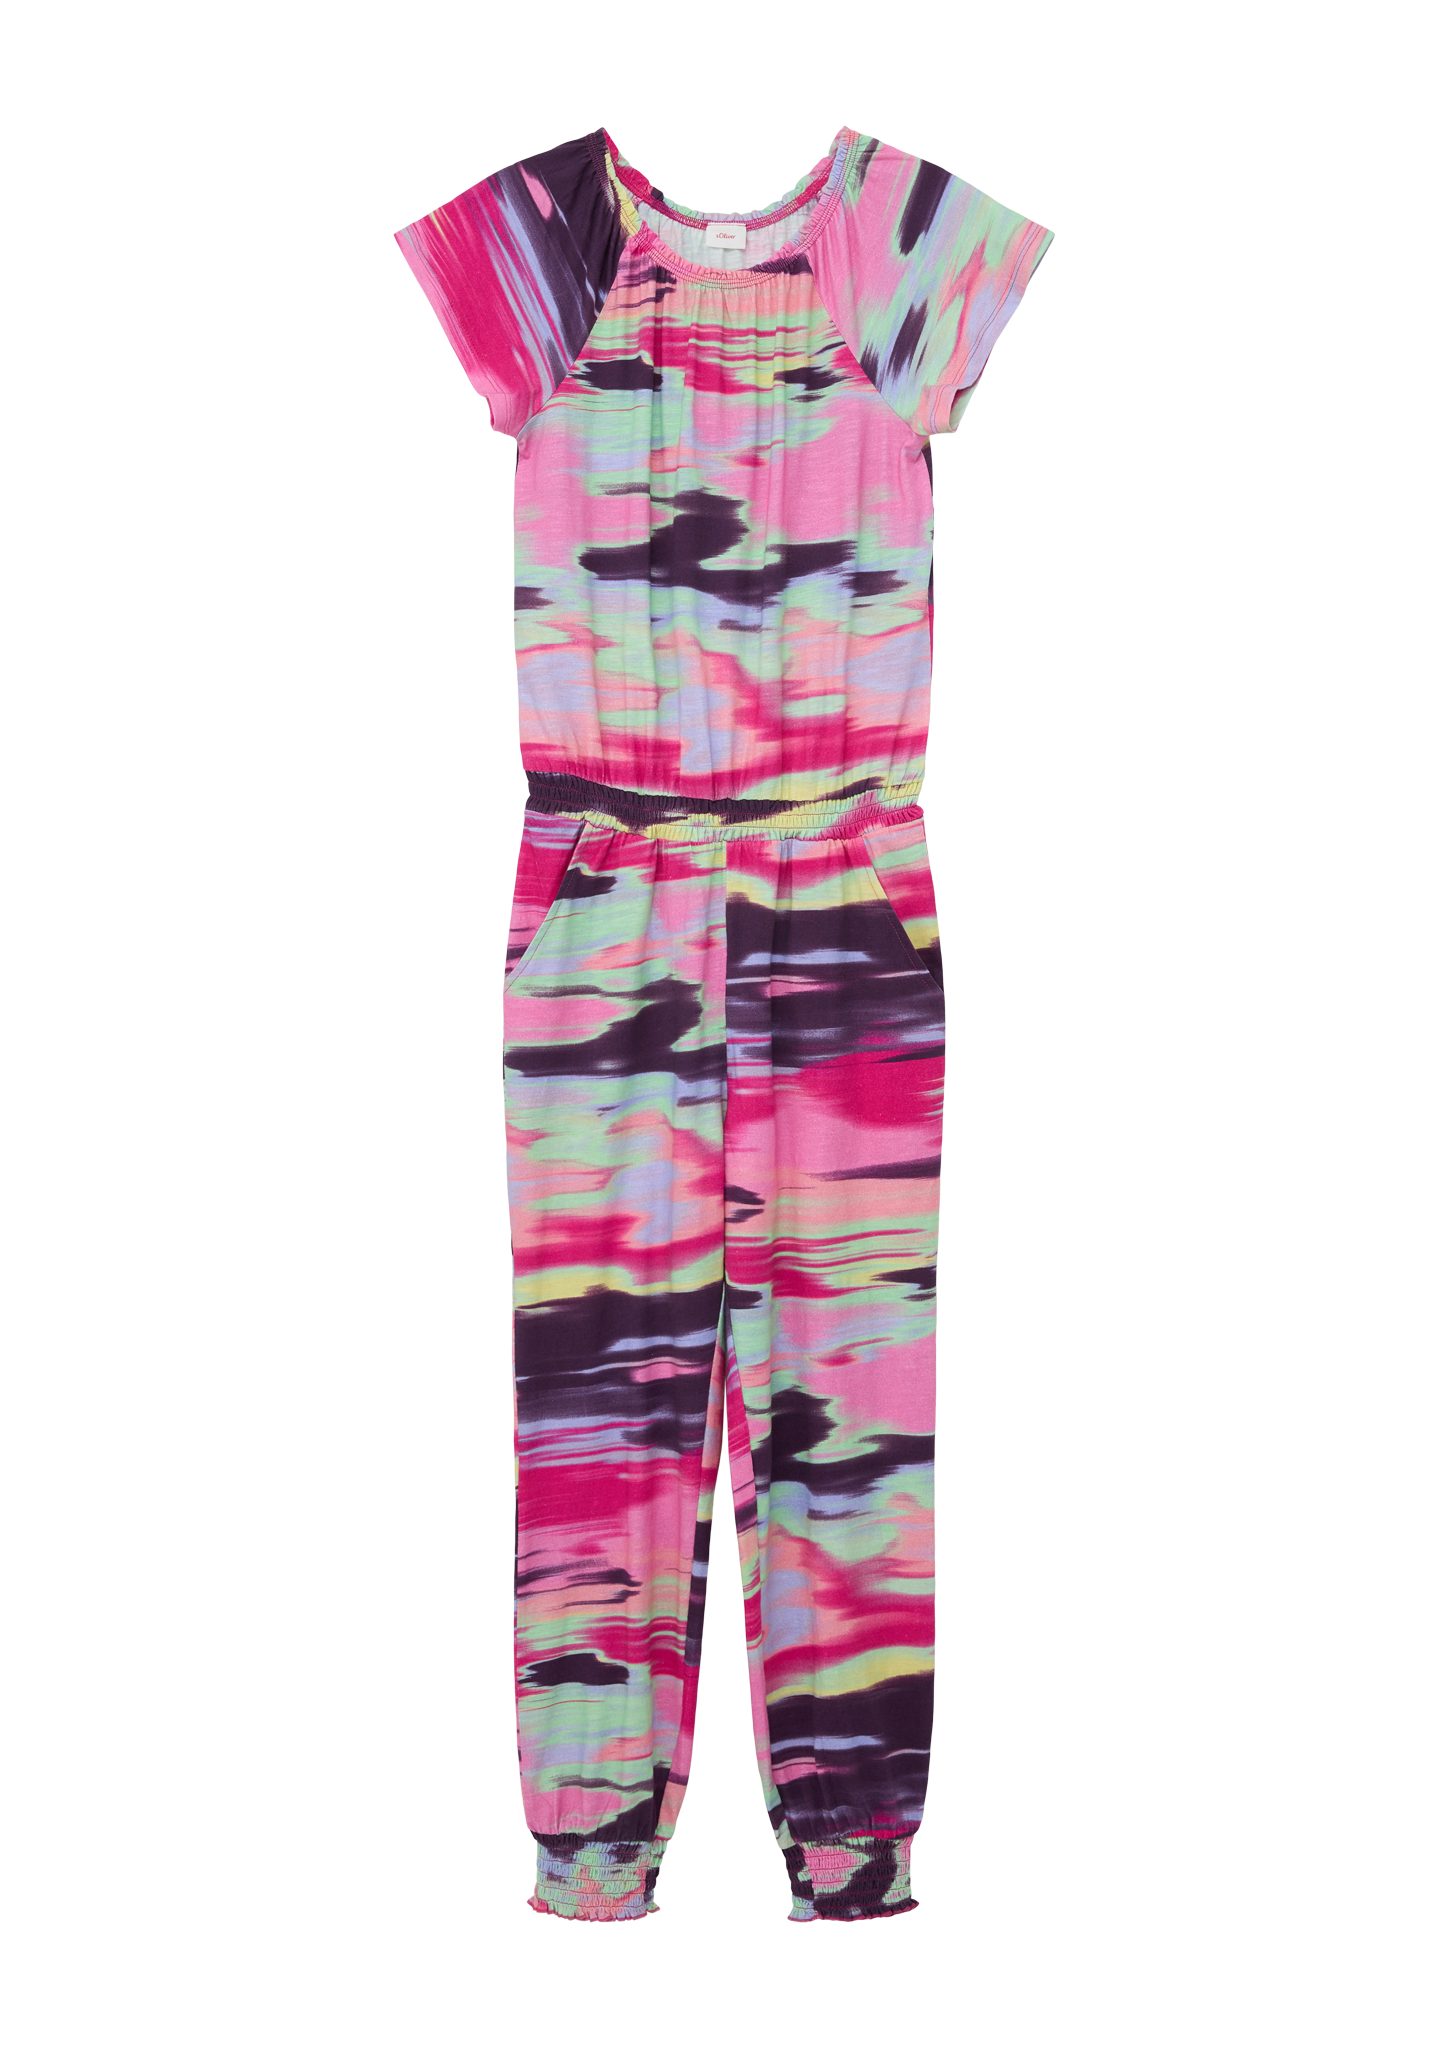 s.Oliver Overall Overall Print abstraktem mit Smok-Detail